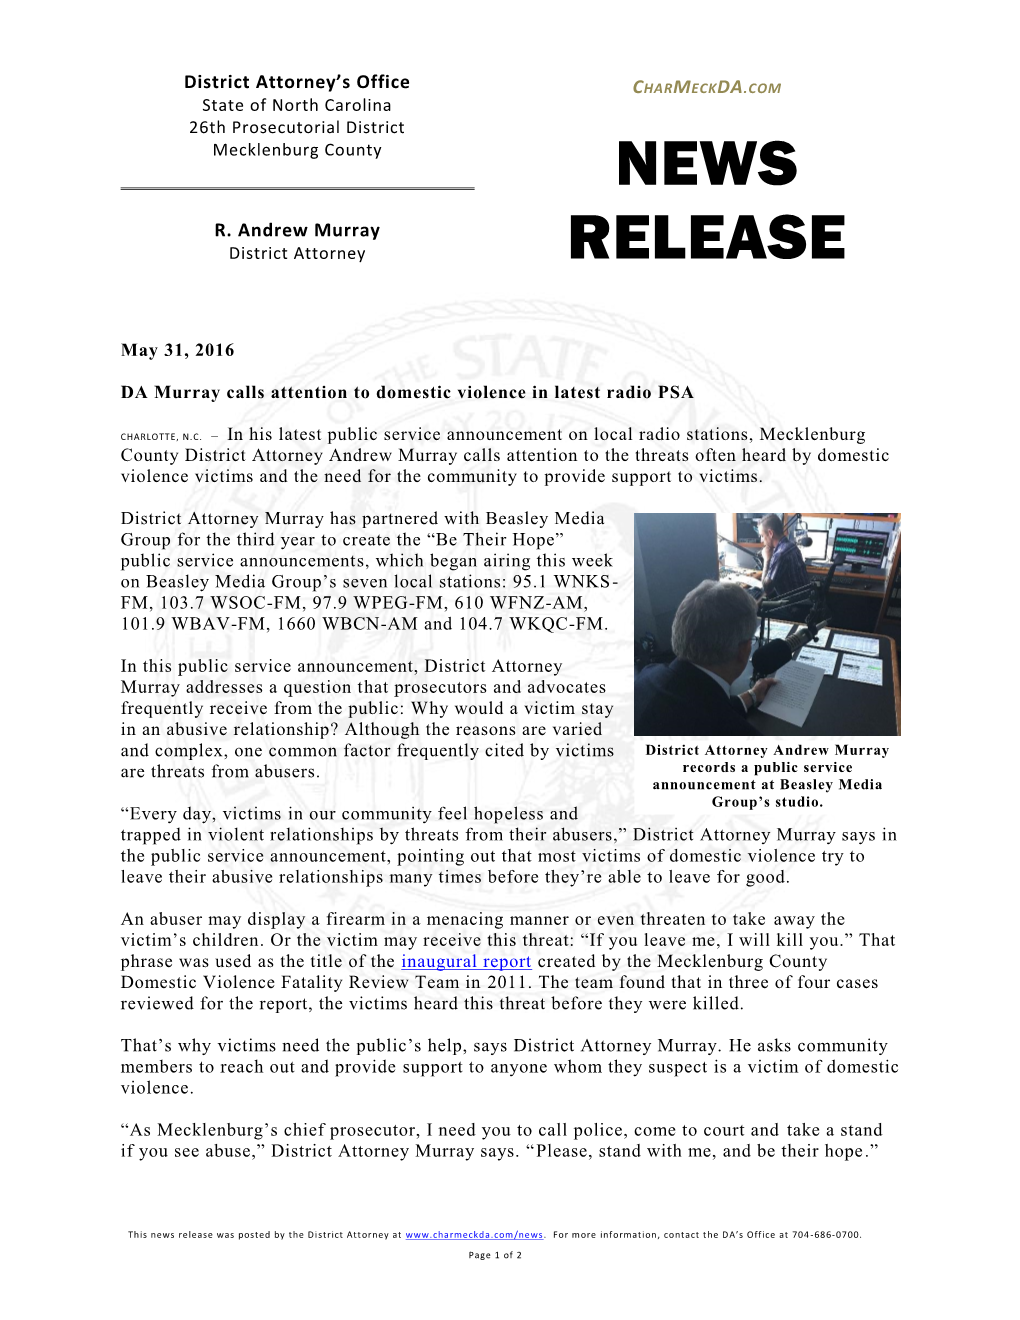 News Release Was Posted by the District Attorney At